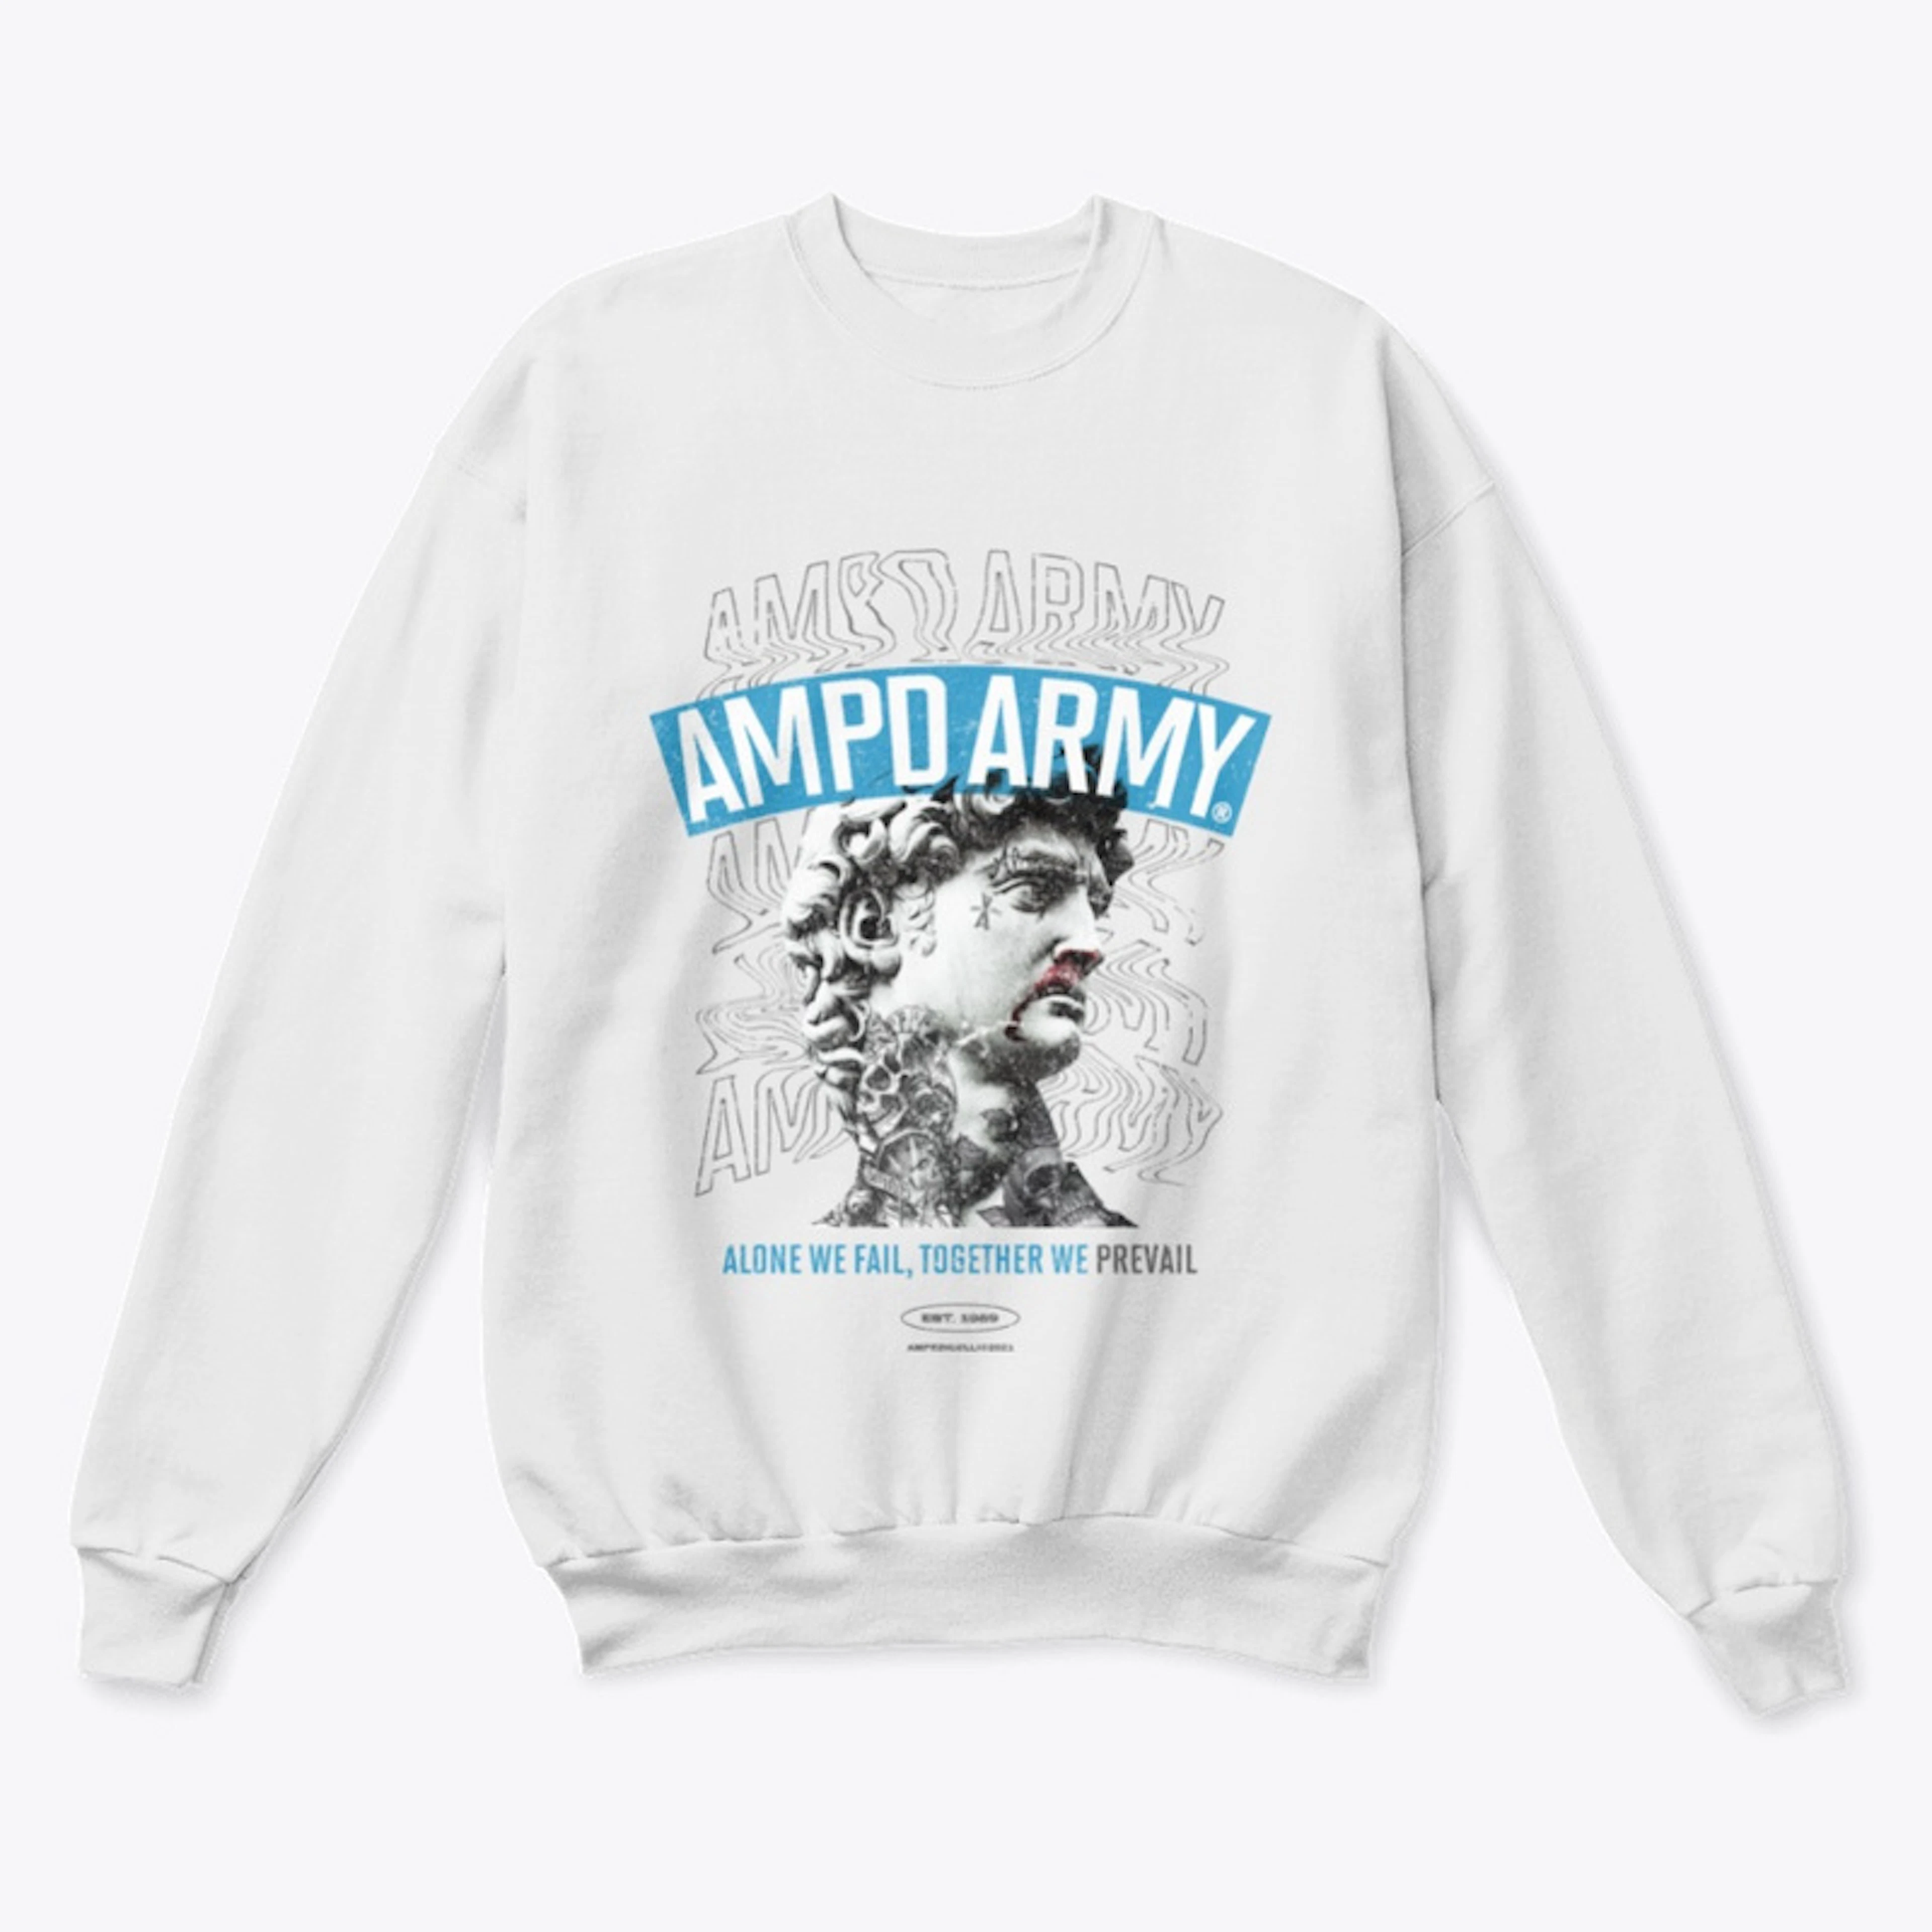 AMPD ARMY PREVAIL CREW NECK SWEATER WHIT